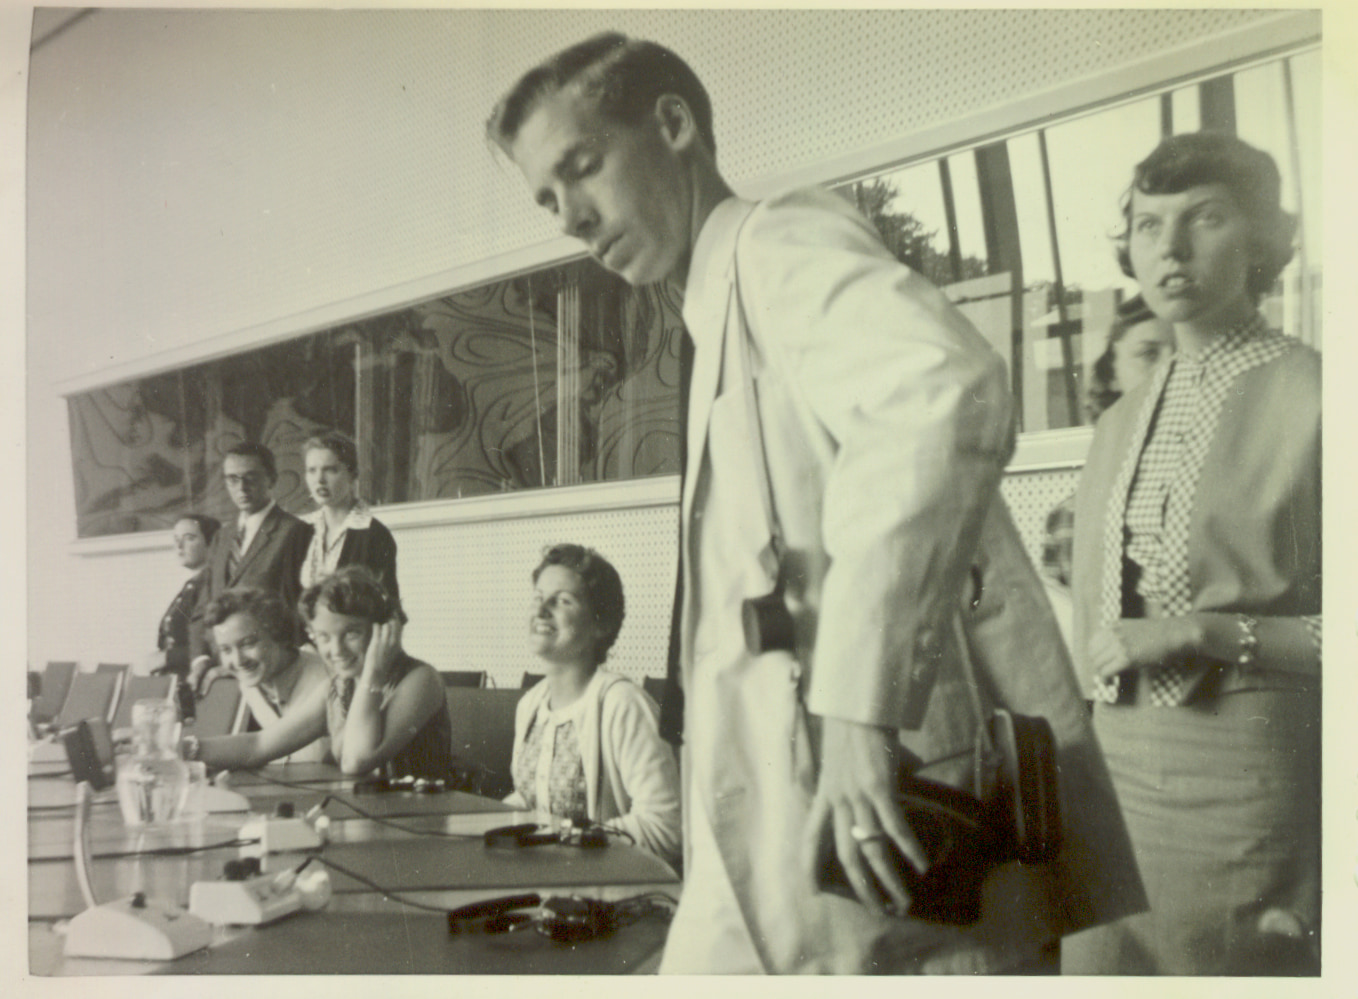 Getting a head-start on his career in the Foreign Service, Ken Kurze visited the NATO Conference in Bonn with other JYM students in 1956-57